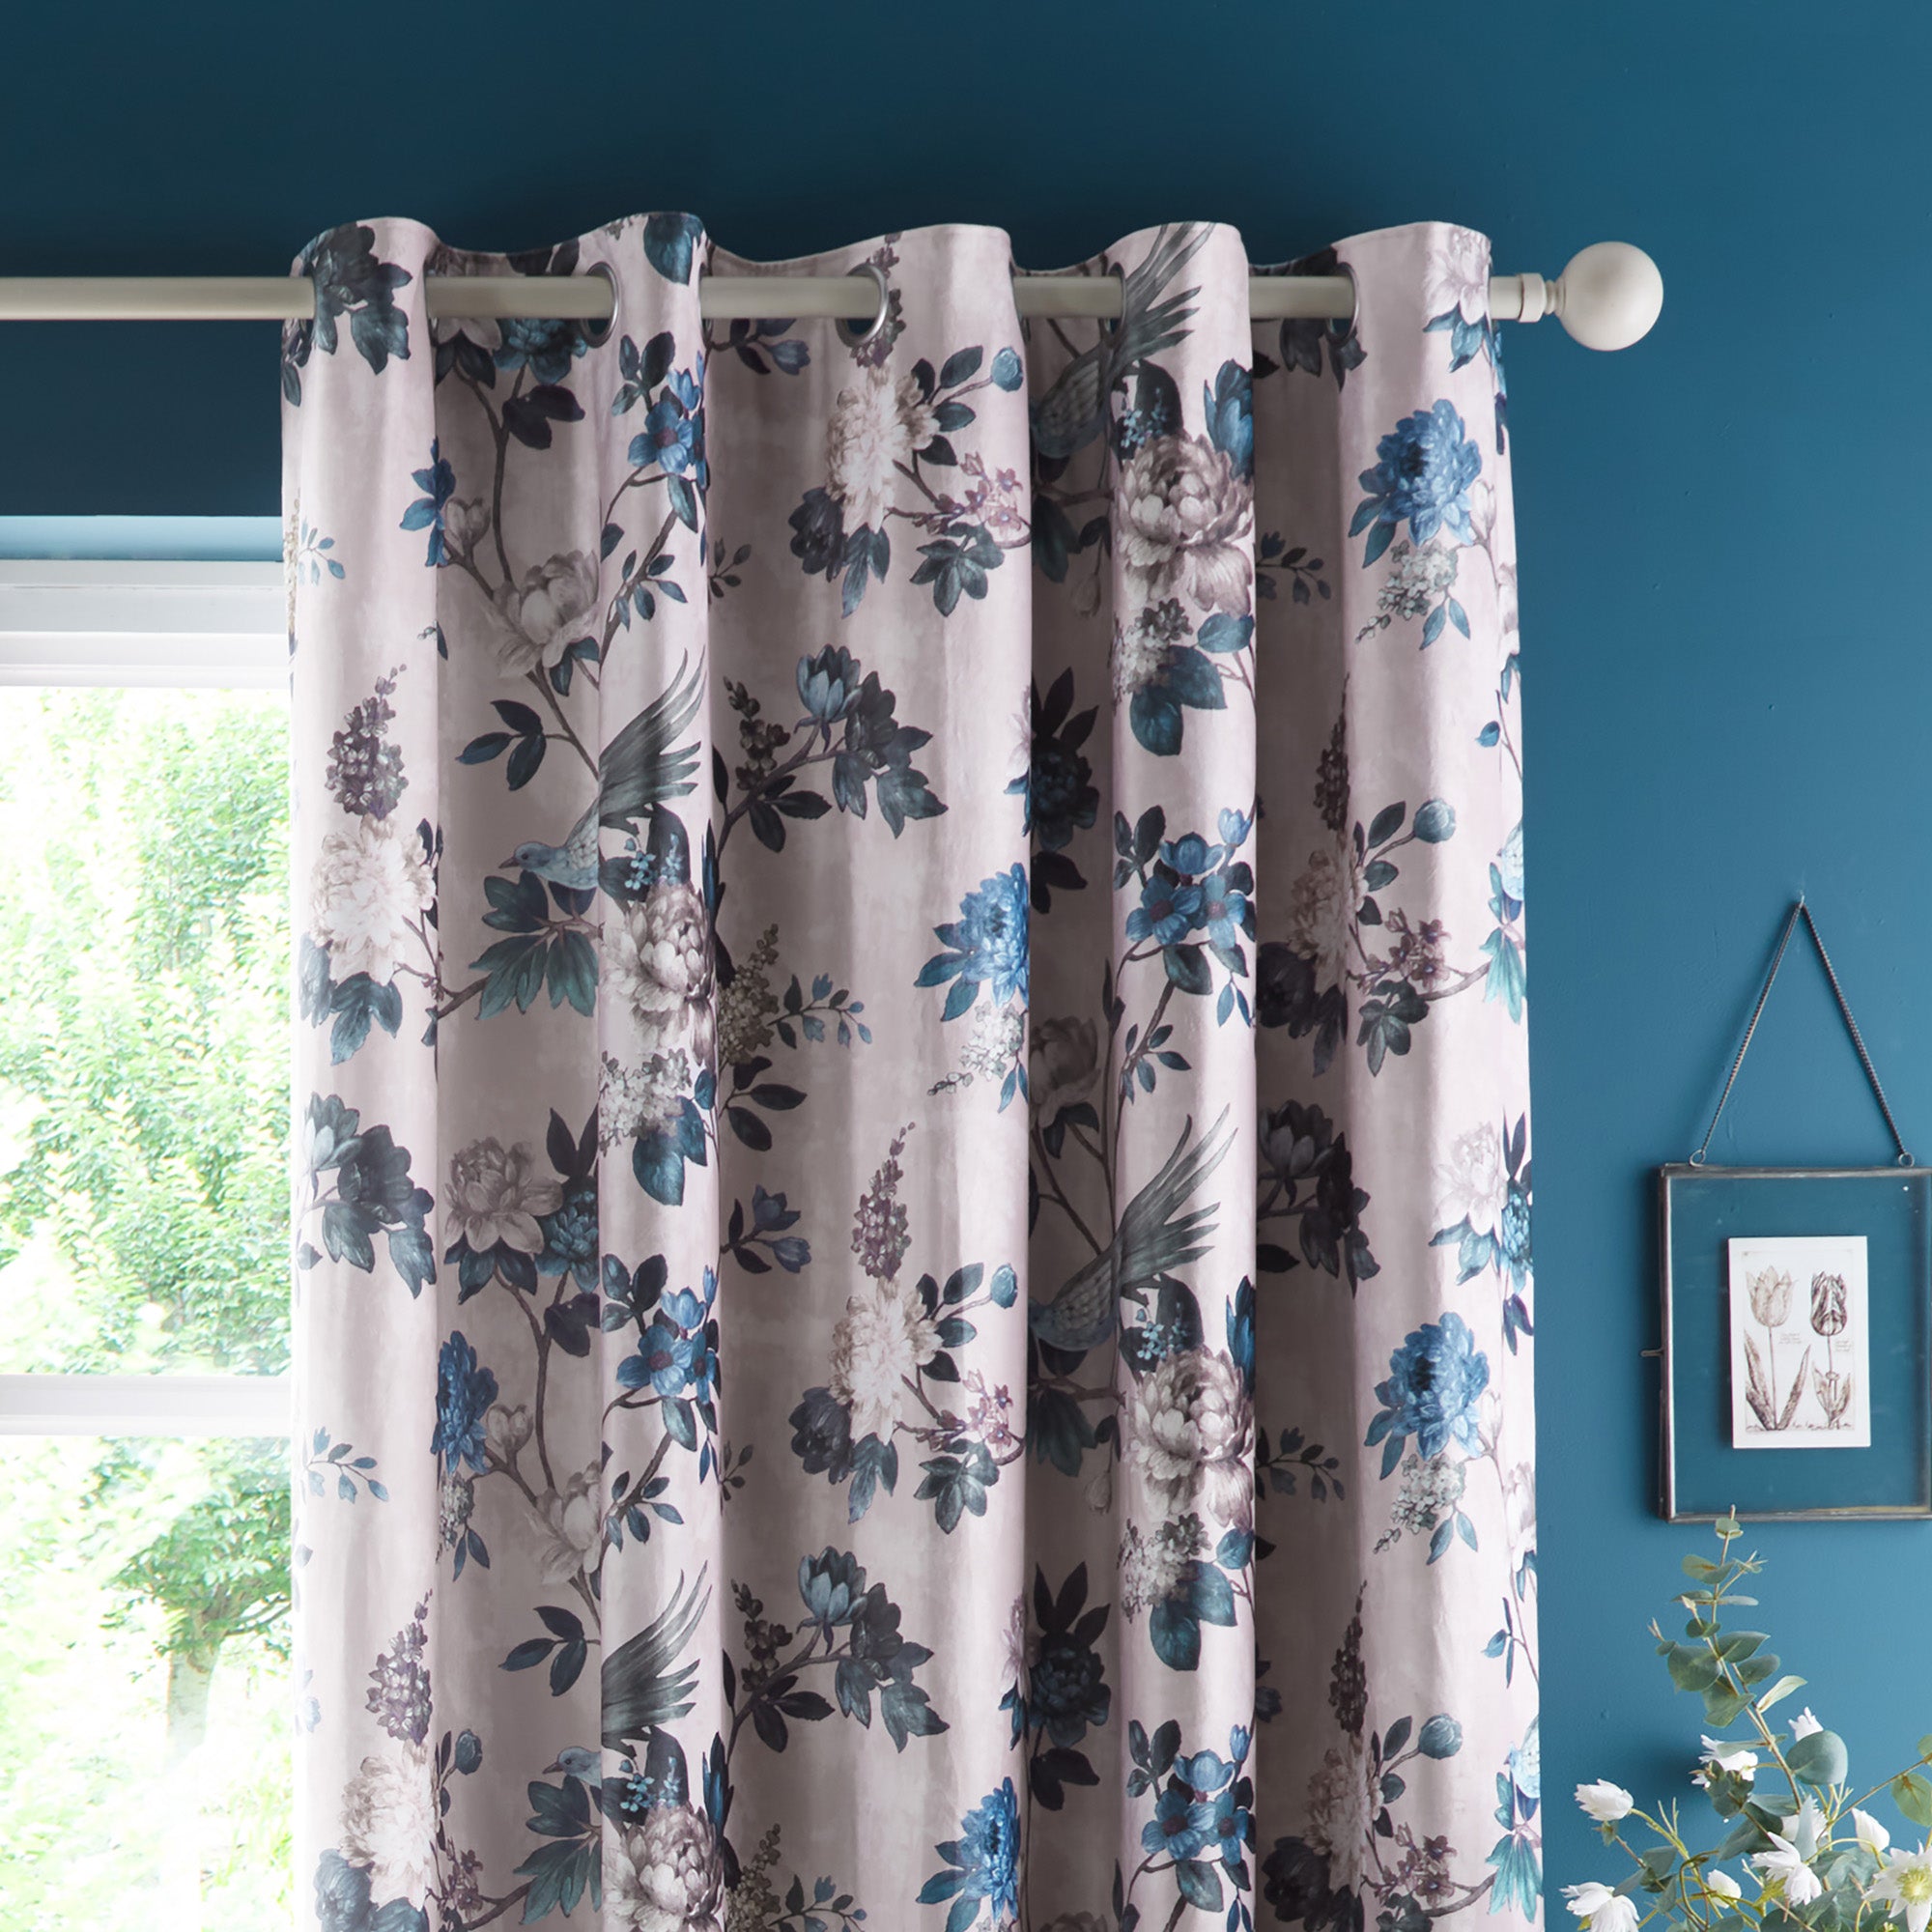 Pair of Eyelet Curtains Windsford by Appletree Heritage in Teal